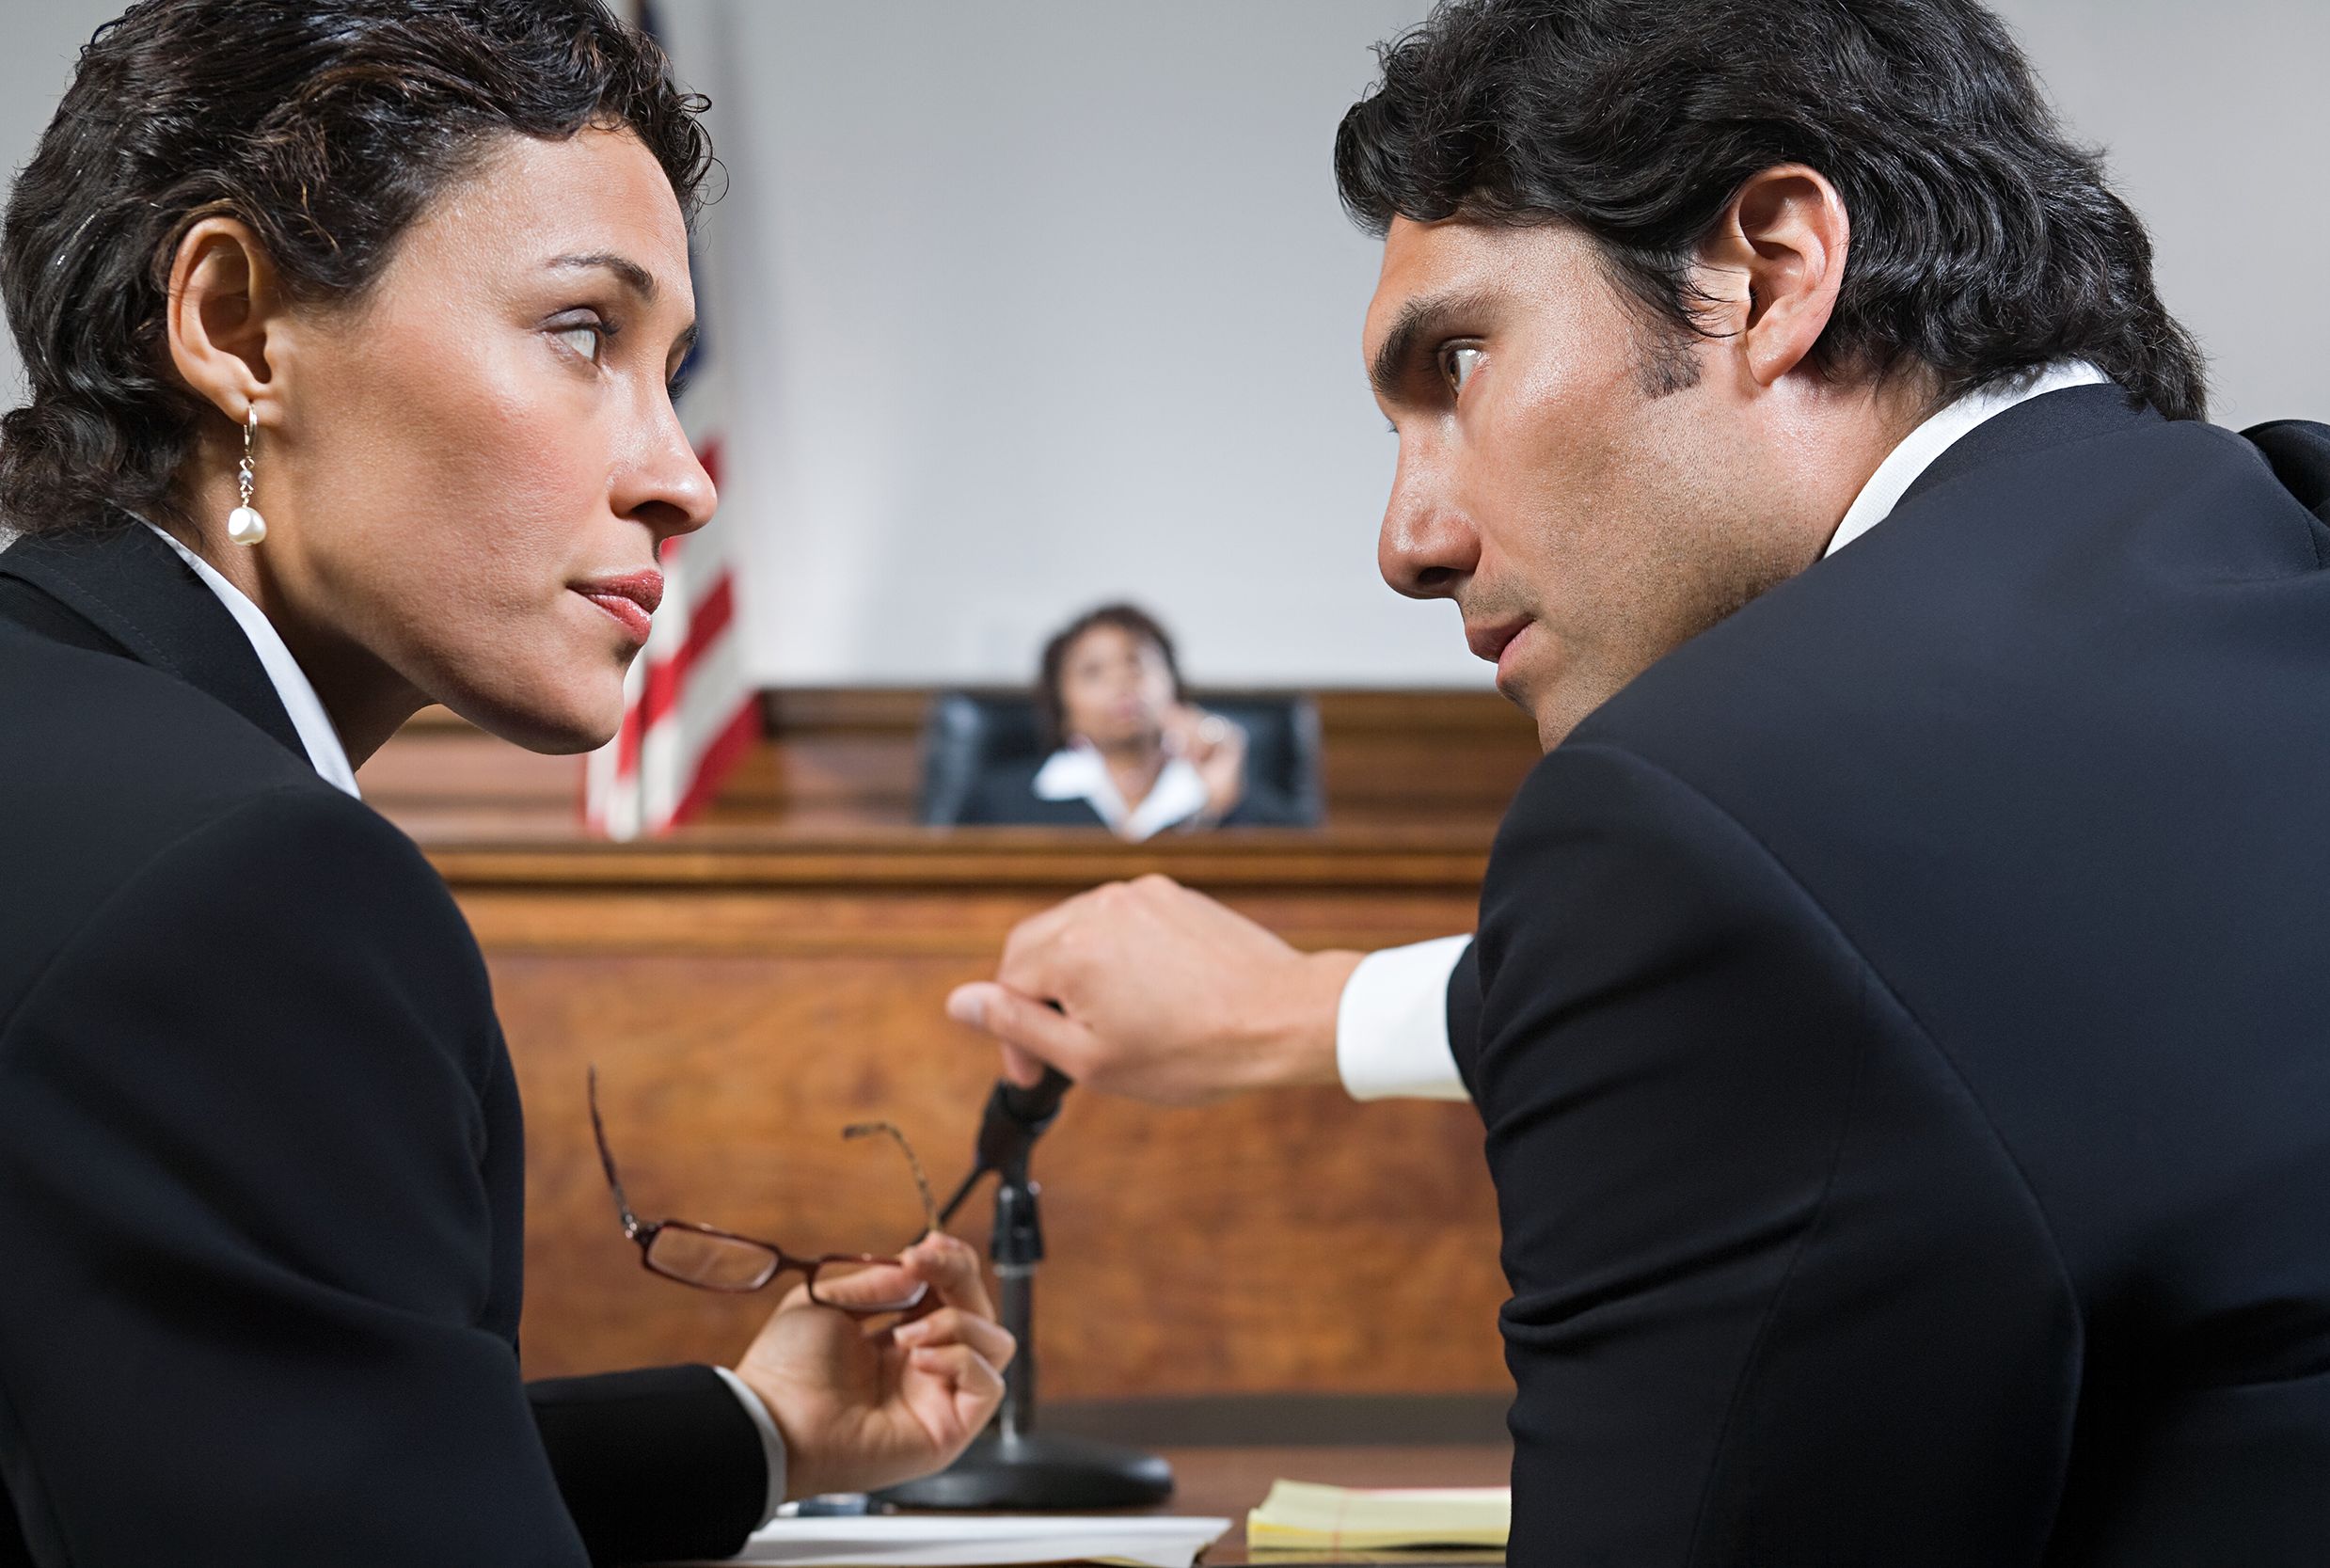 6 Tips To Defend Yourself Against Aggravated Assault Charges